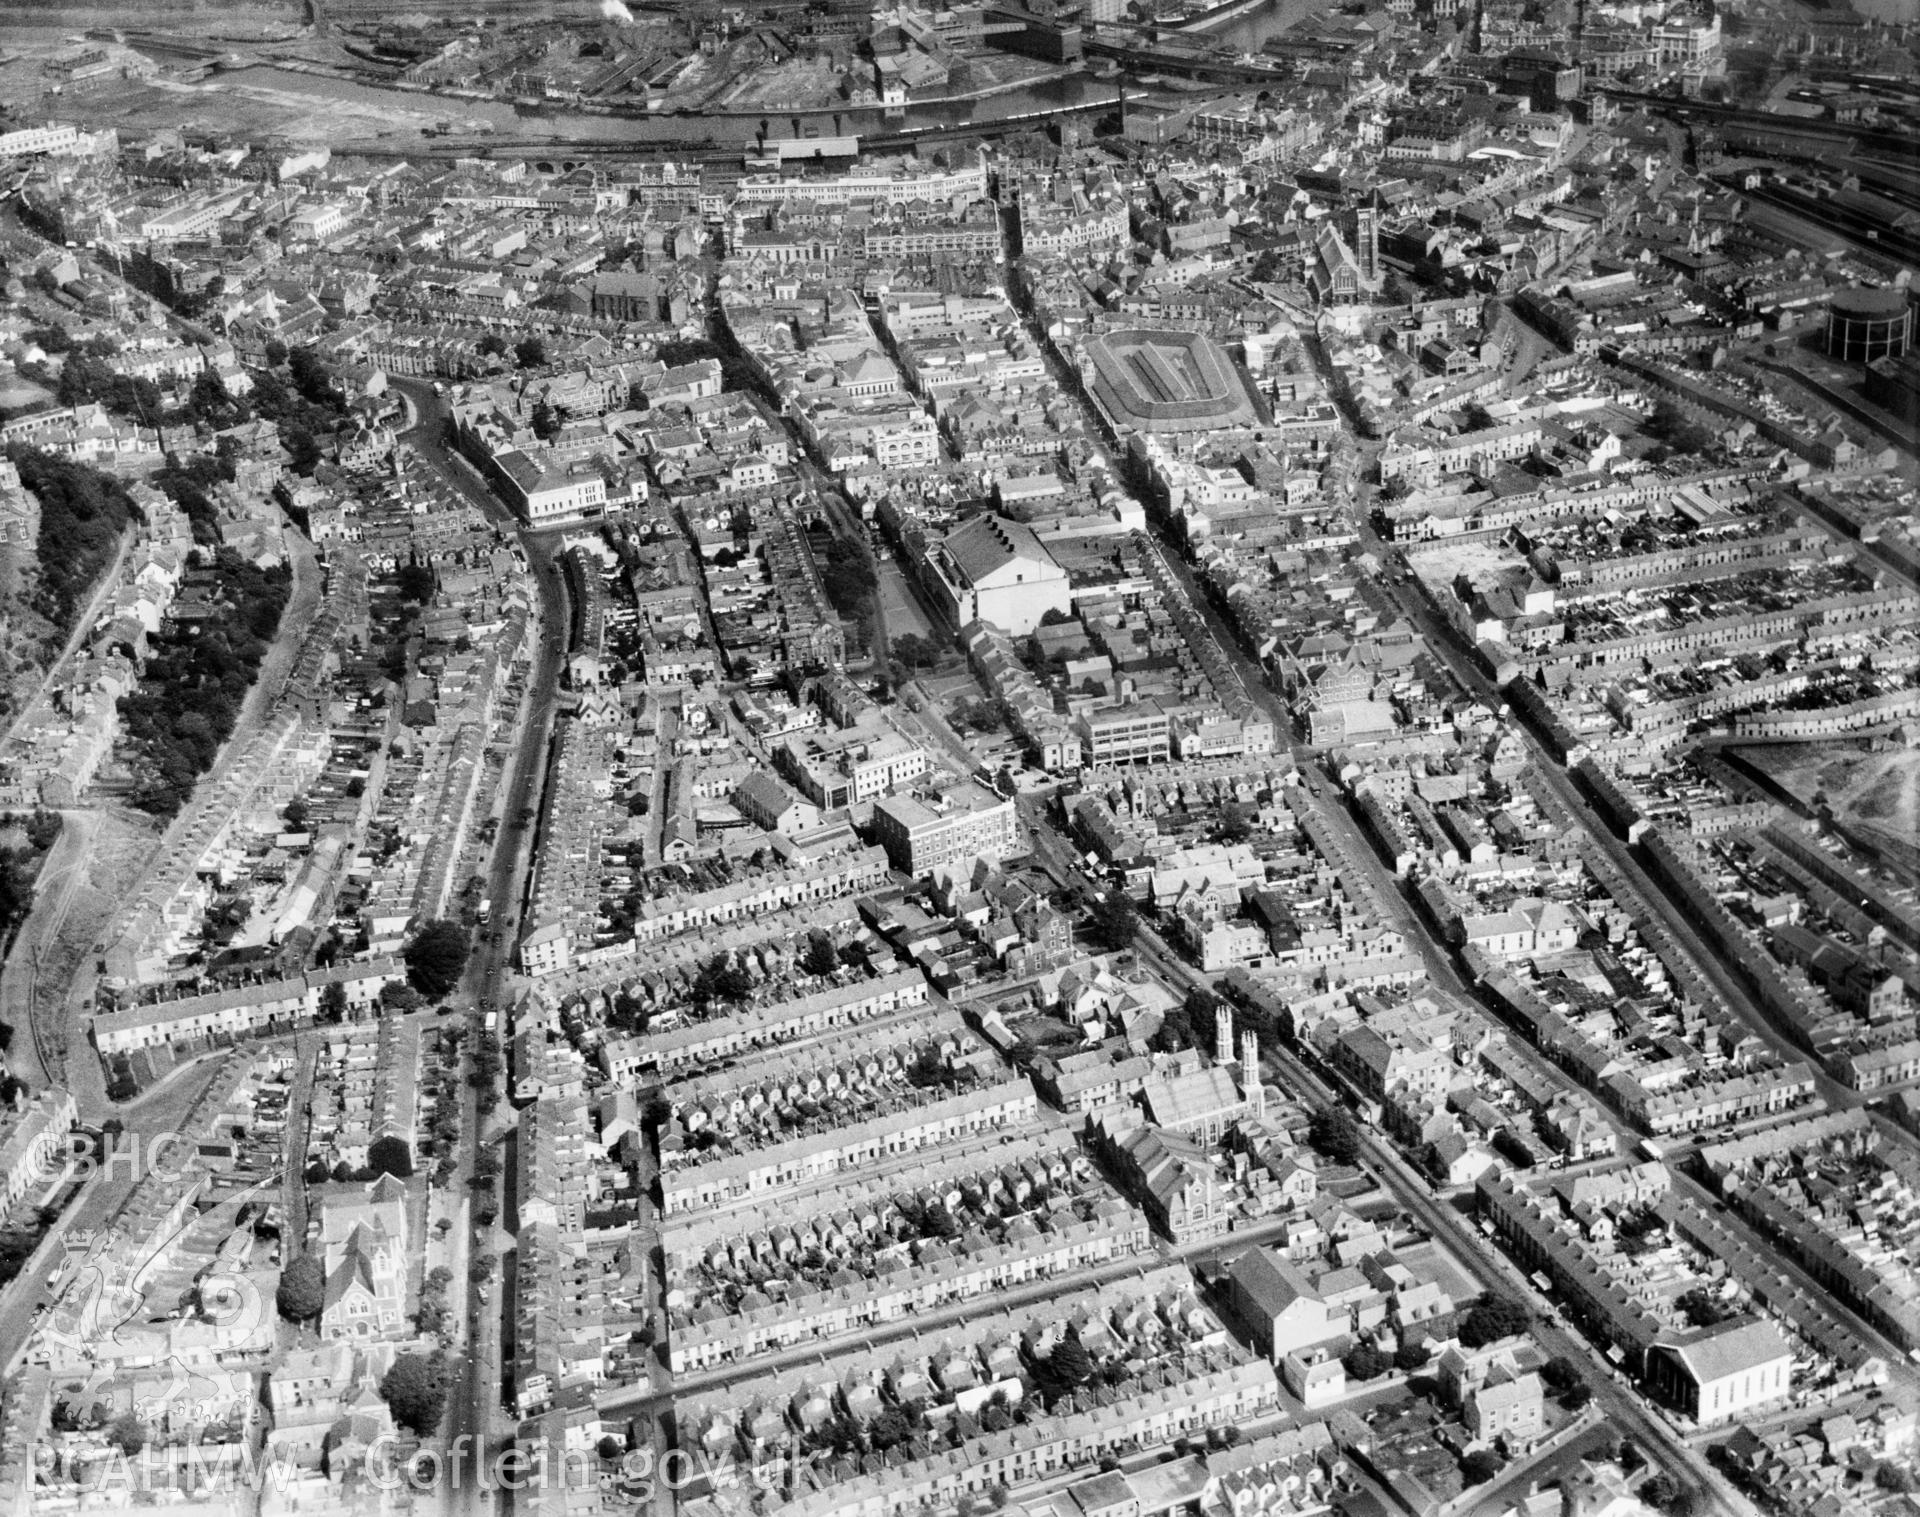 View of central Swansea, oblique aerial view. 5?x4? black and white glass plate negative.